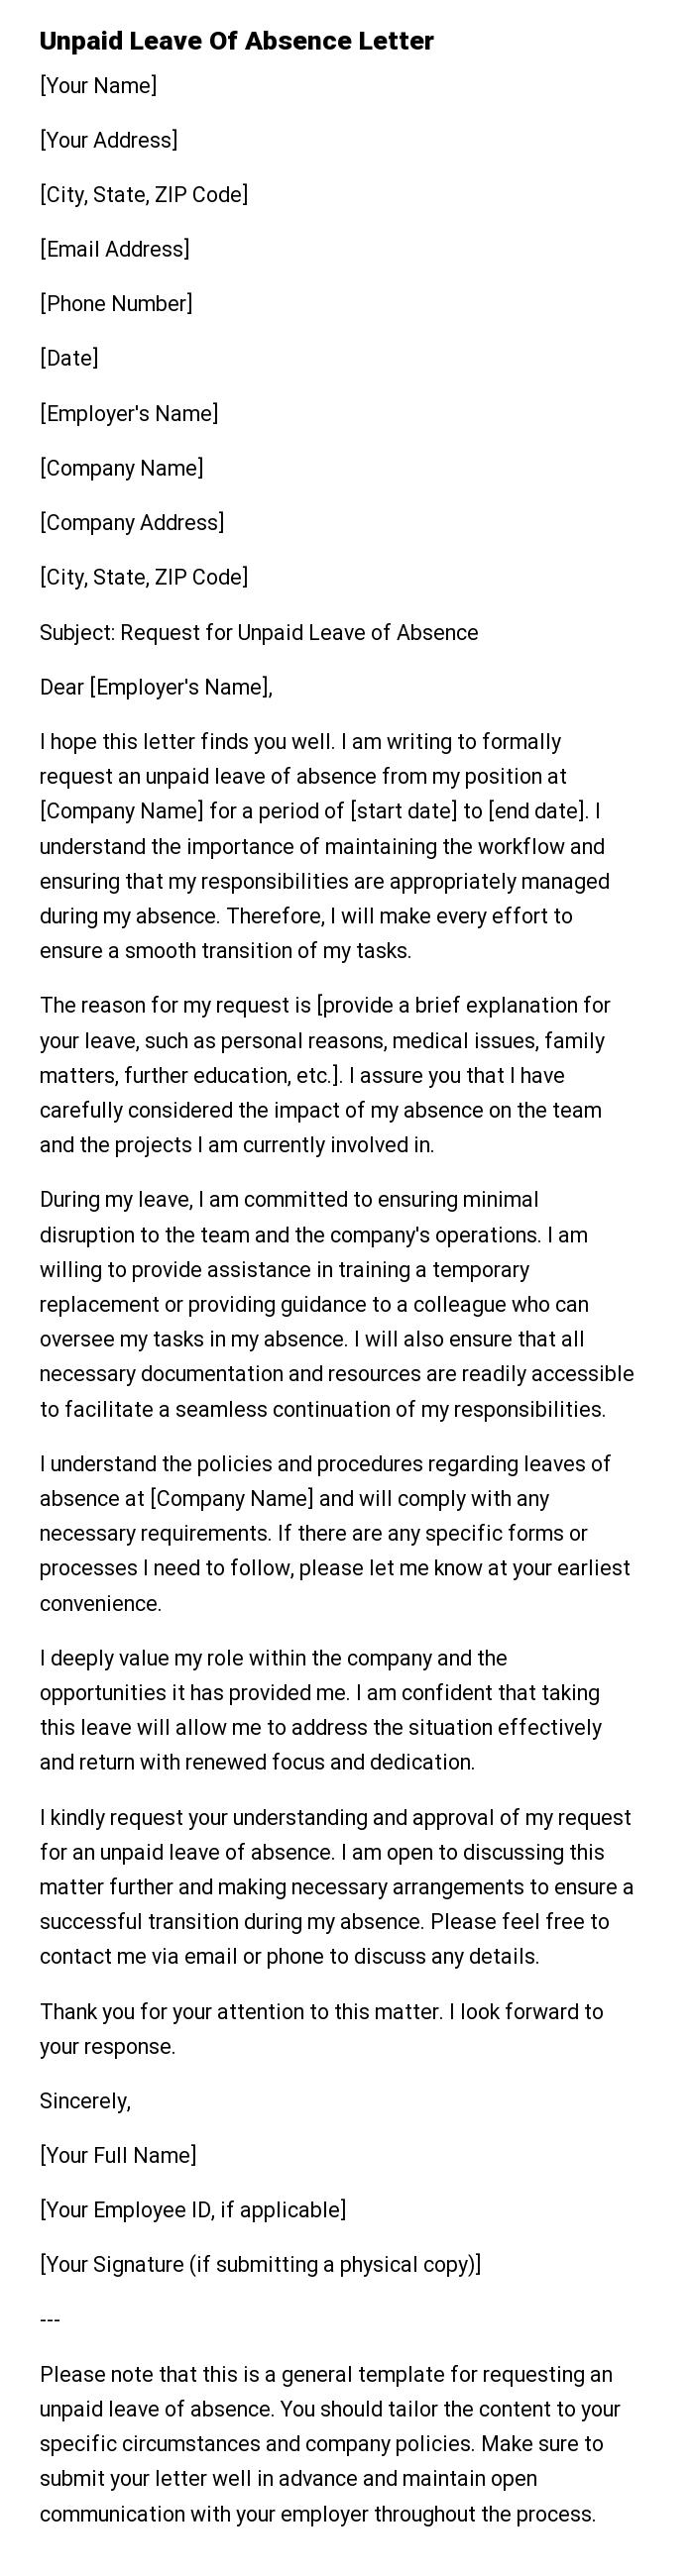 Unpaid Leave Of Absence Letter